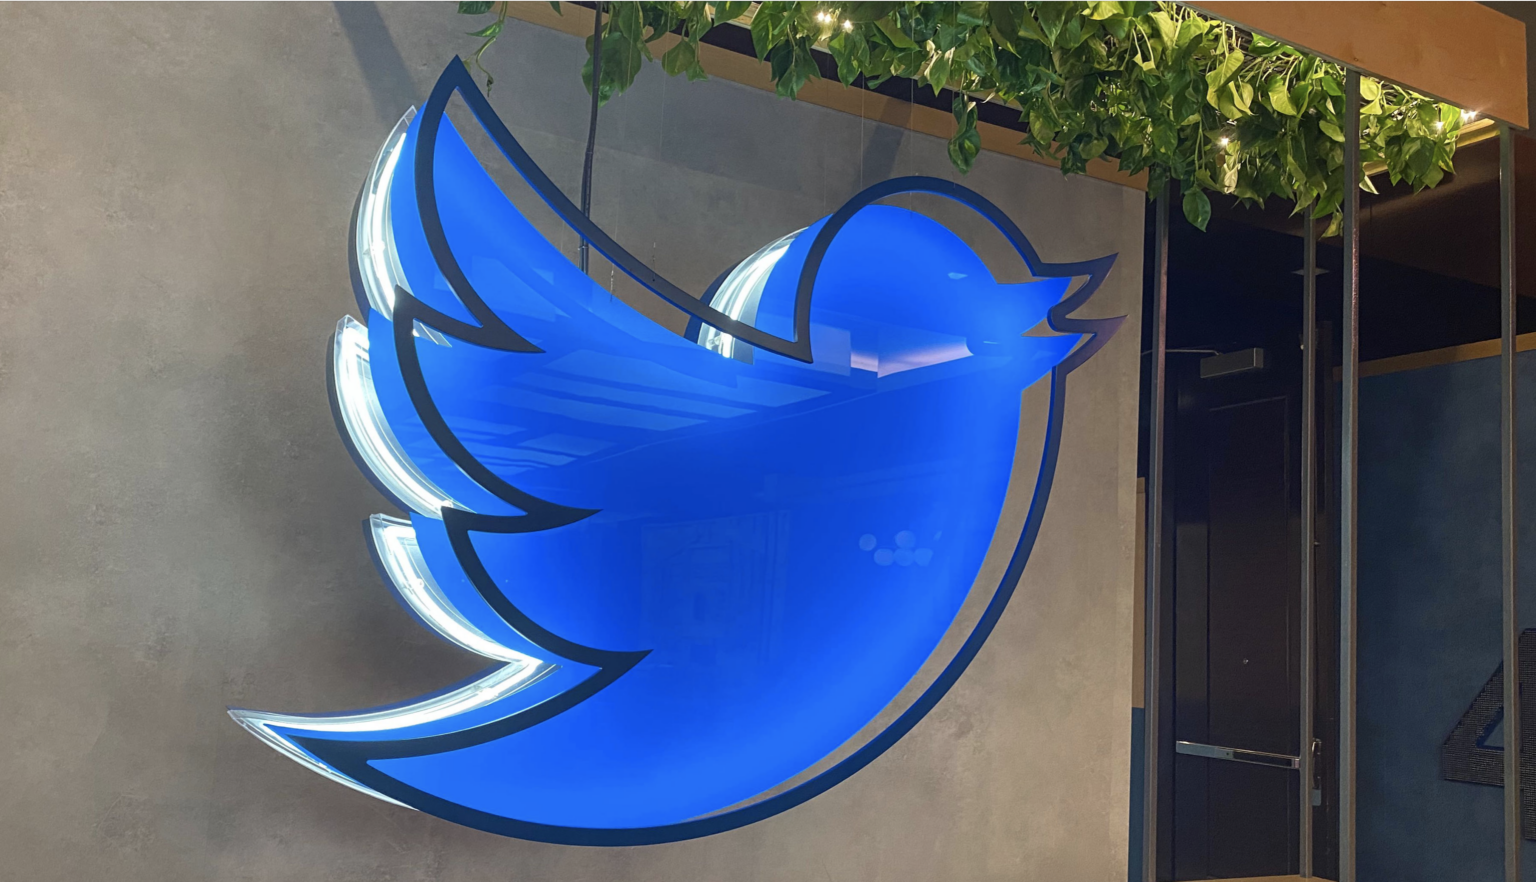 Twitter adds new sharing options to audio rooms